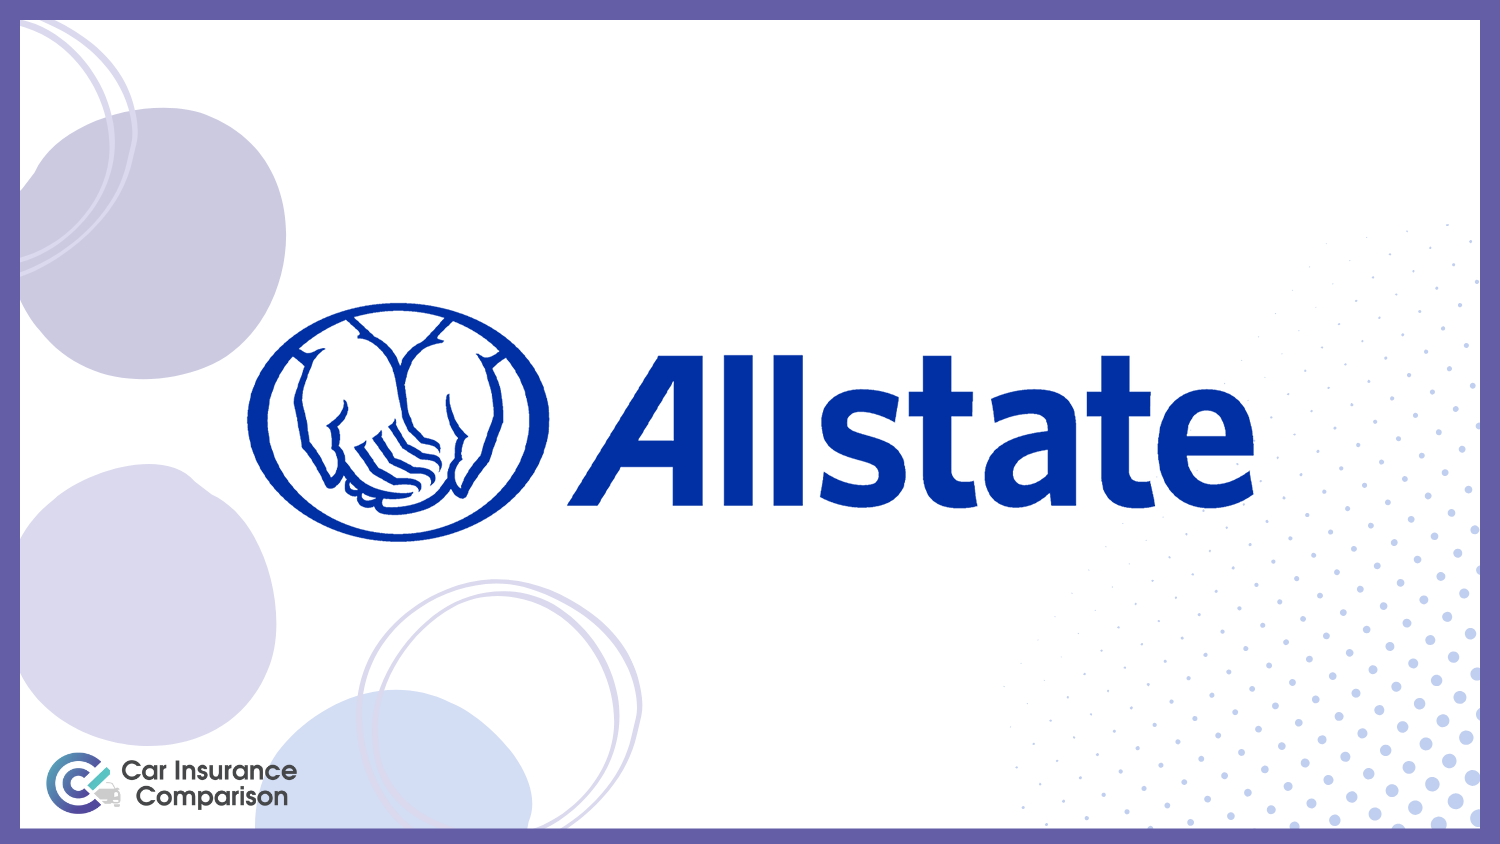 Allstate: Best Car Insurance for Low-Income Drivers